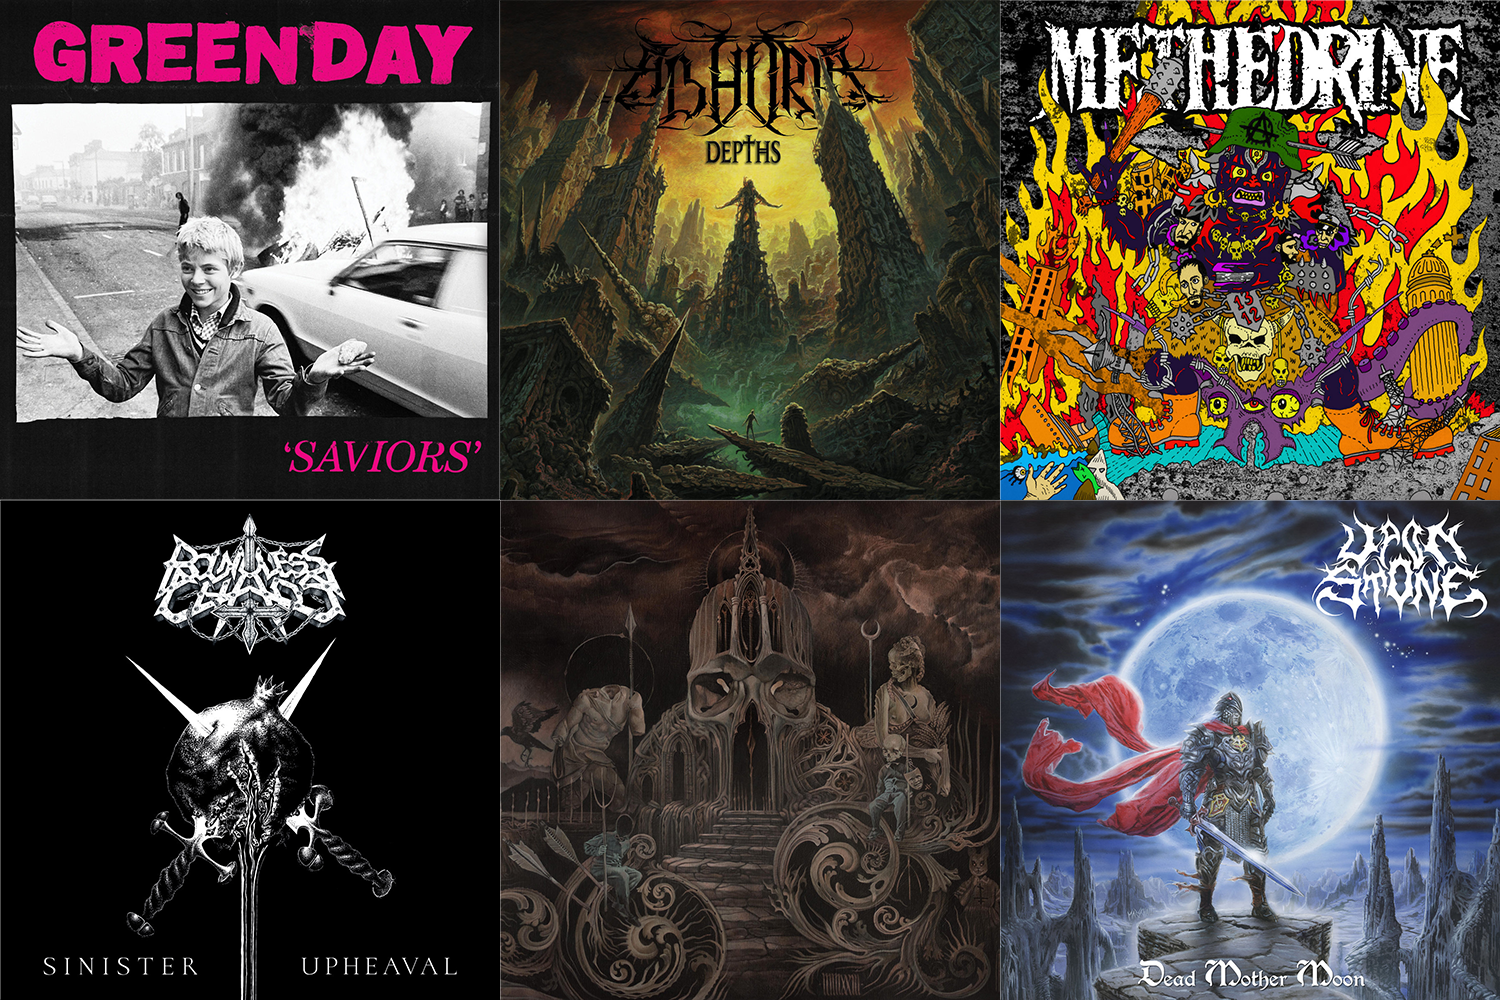 New Flesh 1/19: Releases From Green Day, Upon Stone, Lord Dying & More!